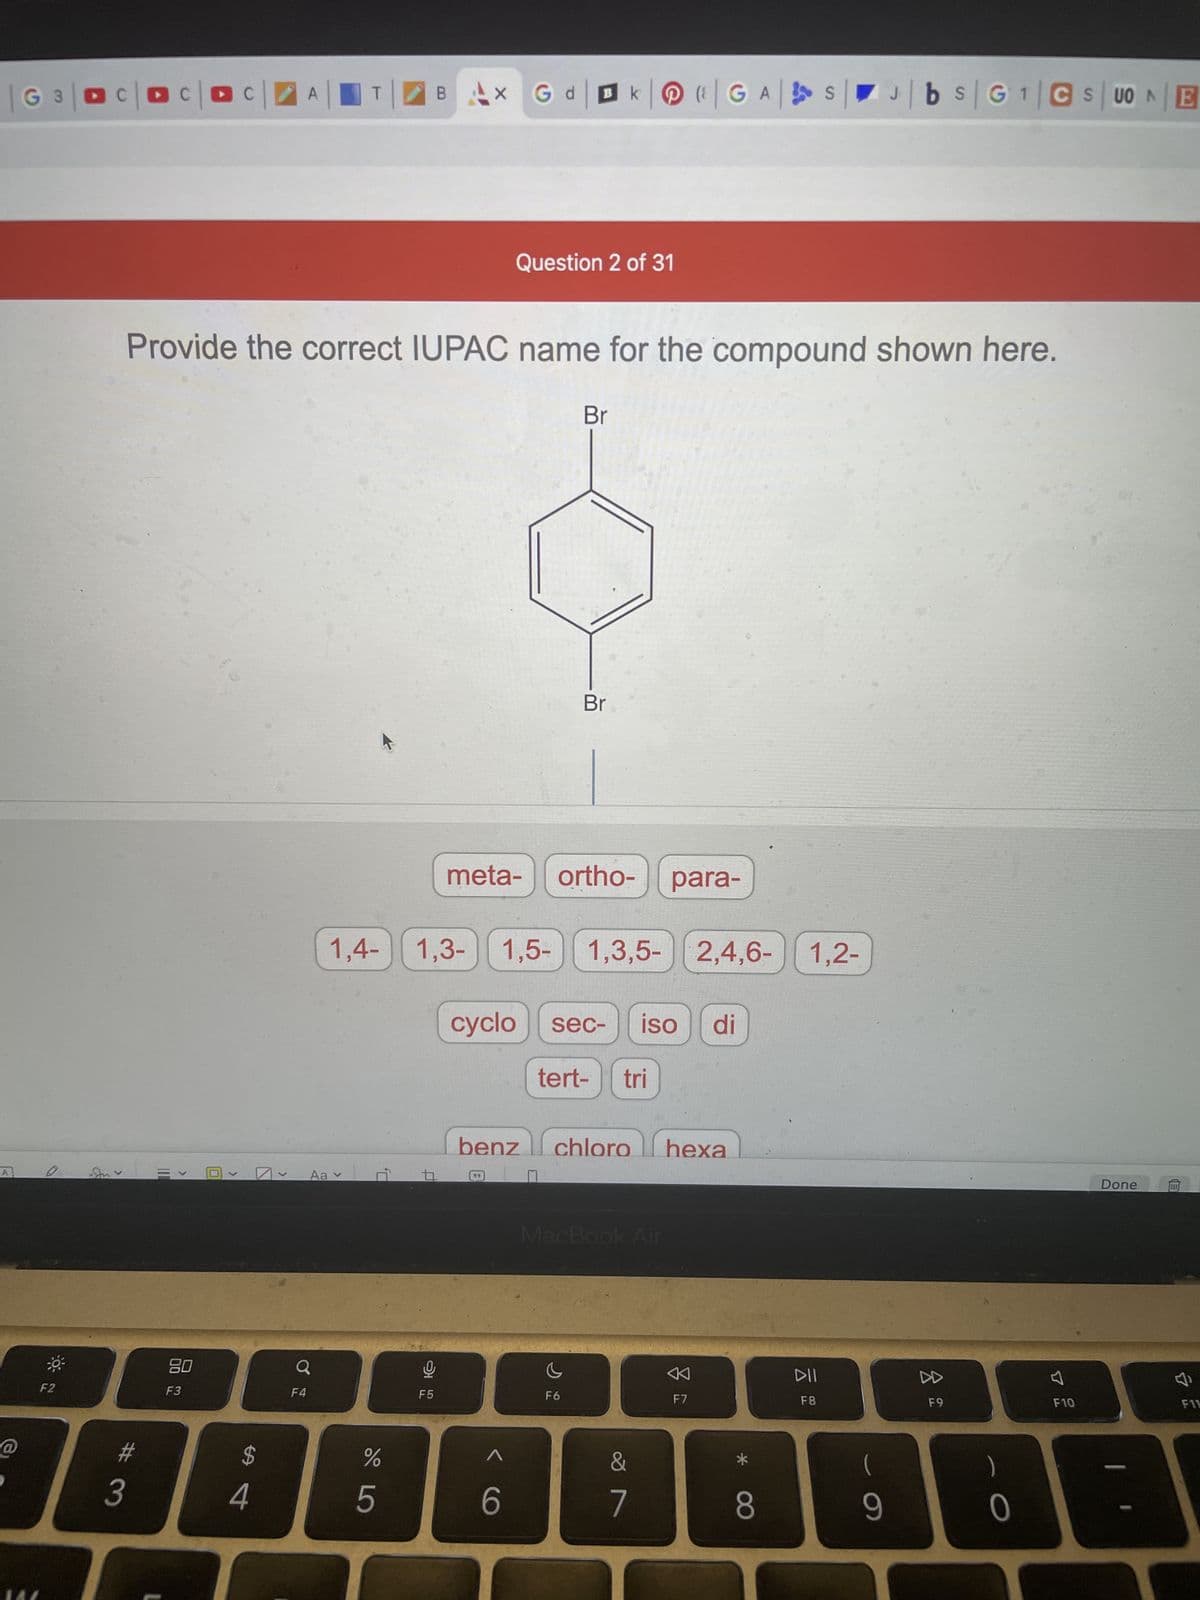 @
G3|DC|OC|Oc
F2
A
T
B
BAX G dk | GAS
Question 2 of 31
Provide the correct IUPAC name for the compound shown here.
Br
>
110
>
#
3
80
F3
>
$
4
>
Q
F4
Br
meta- ortho- para-
1,4-1,3-1,5- 1,3,5- 2,4,6- 1,2-
cyclo sec- iso di
tert- tri
benz chloro hexa
Aav
MacBook Air
c
F6
P,
de LO
%
5
A
16
F5
6
&
7
F7
*
8
DII
F8
9
1
J|bs|G¹|CSUONE
F9
0
4
F10
Done
F11